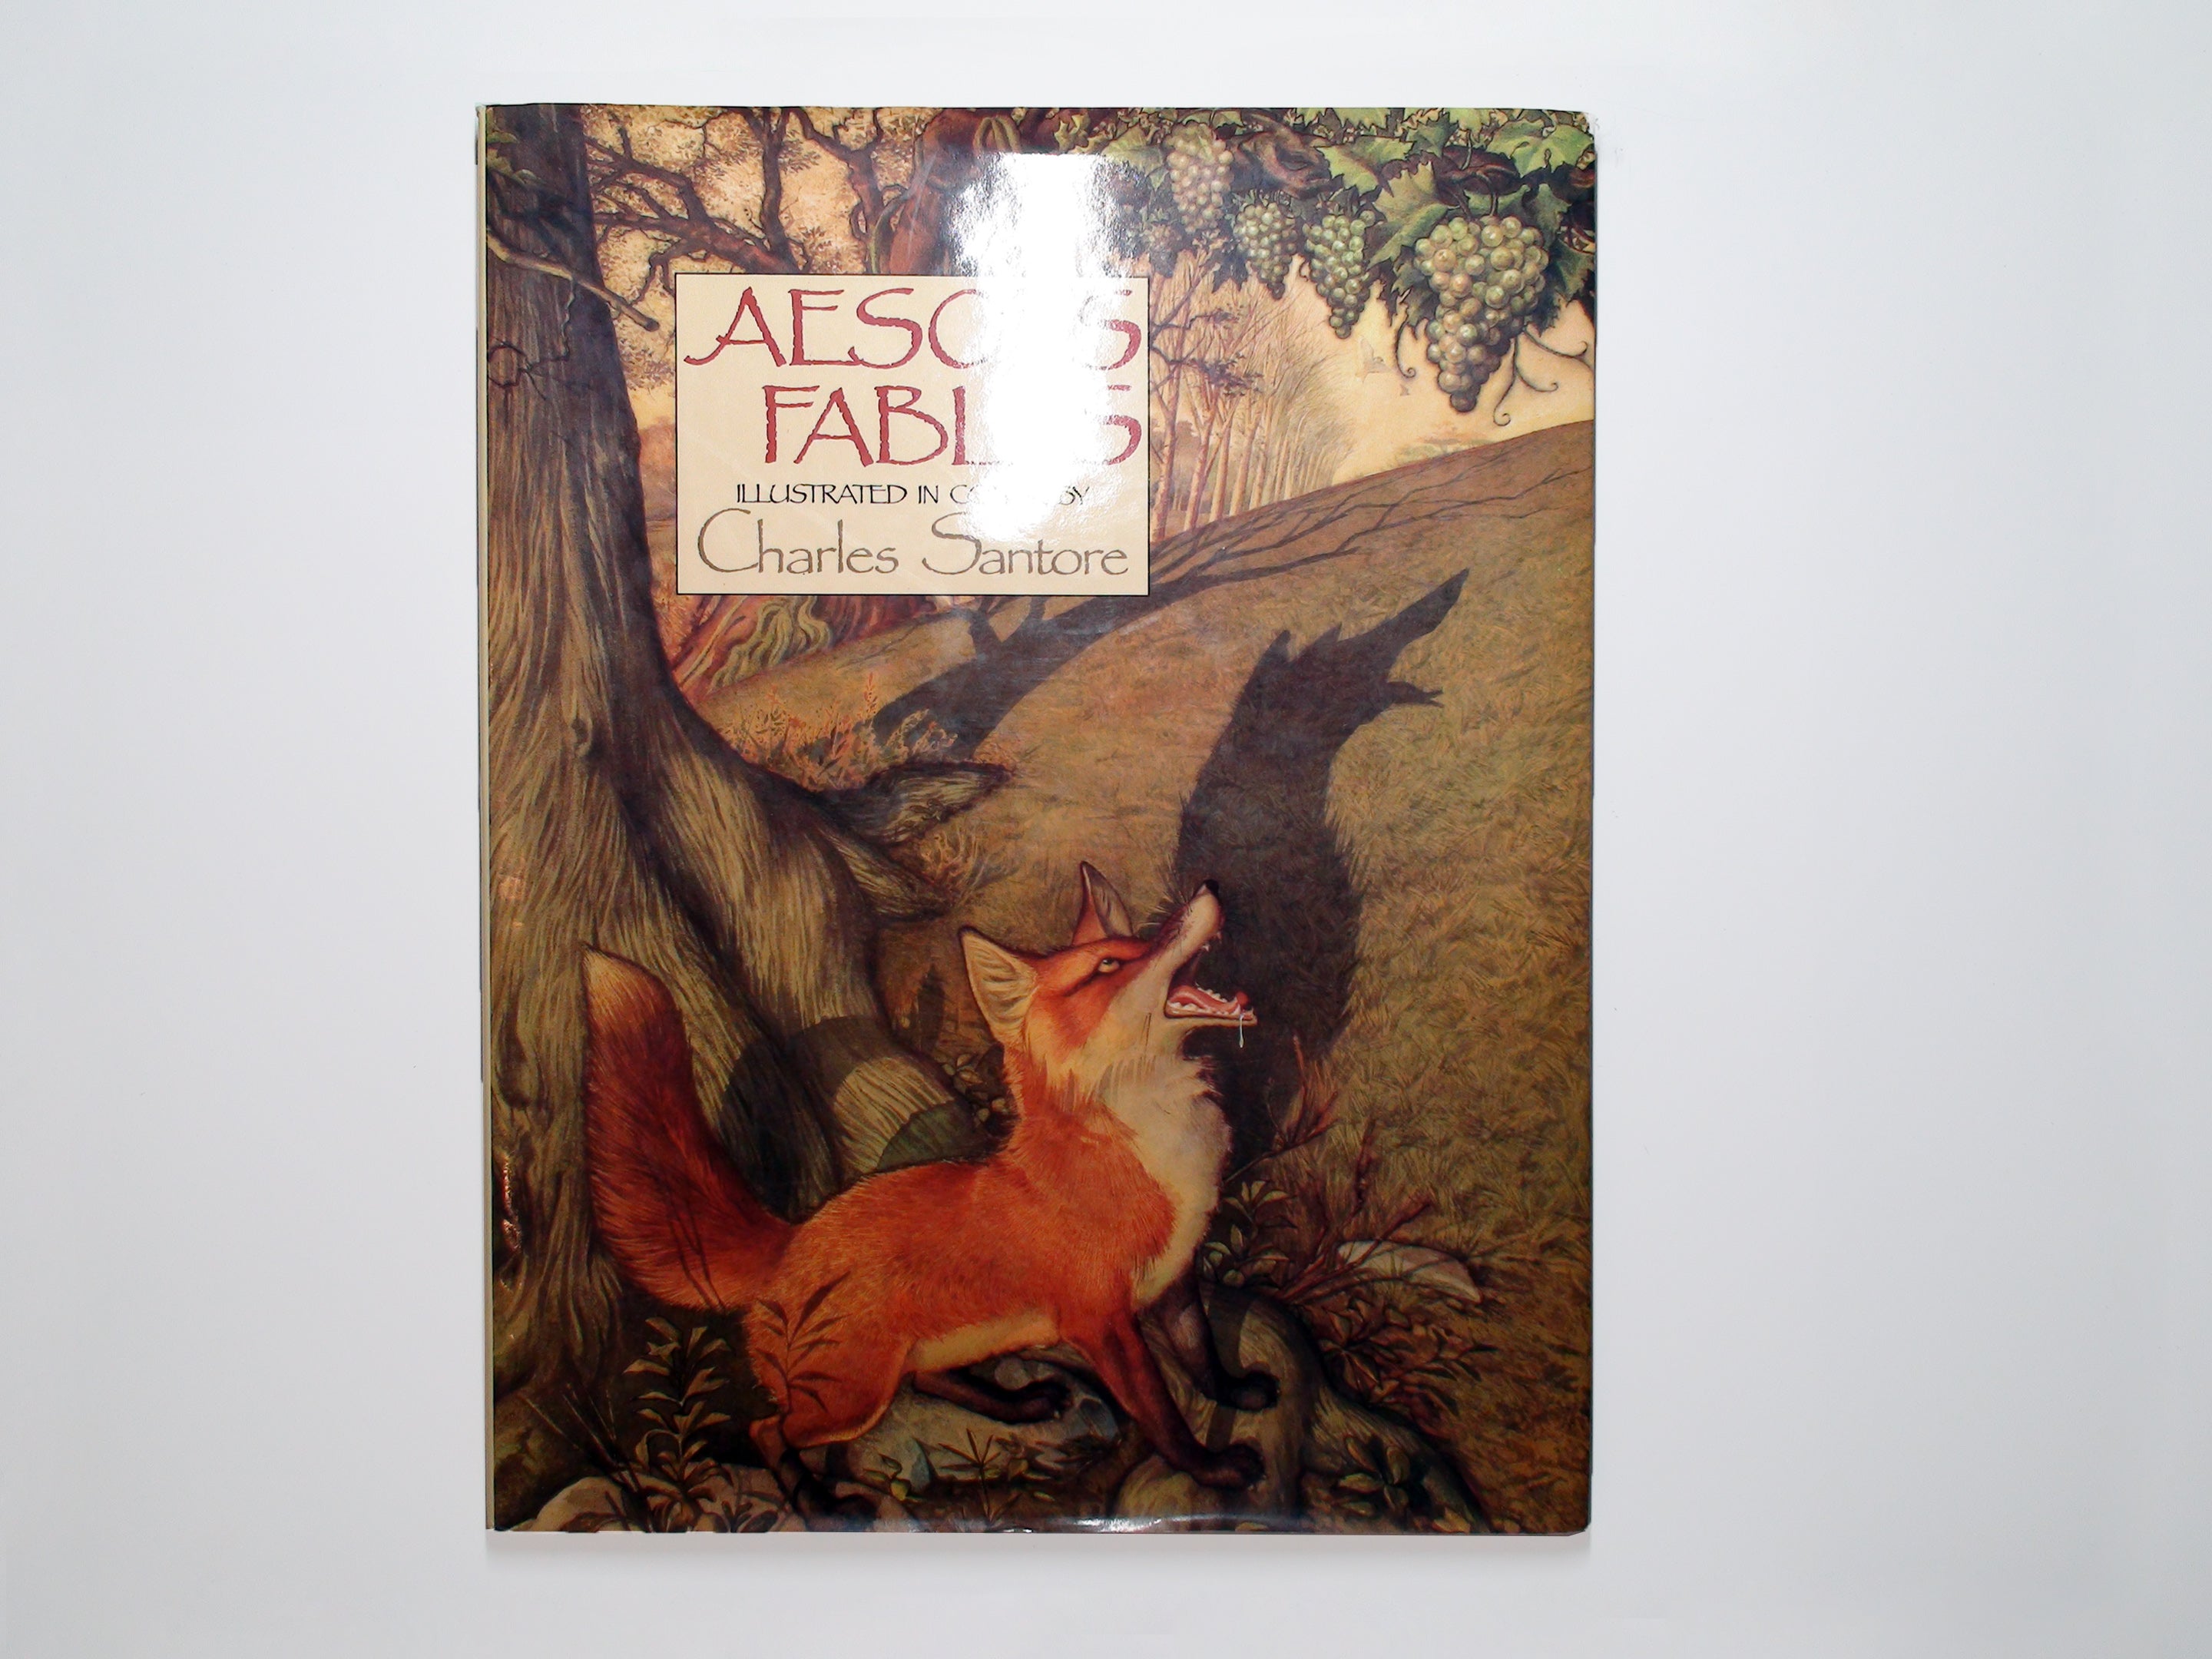 Aesop's Fables, Illustrated by Charles Santore, Jelly Bean Press, 1988